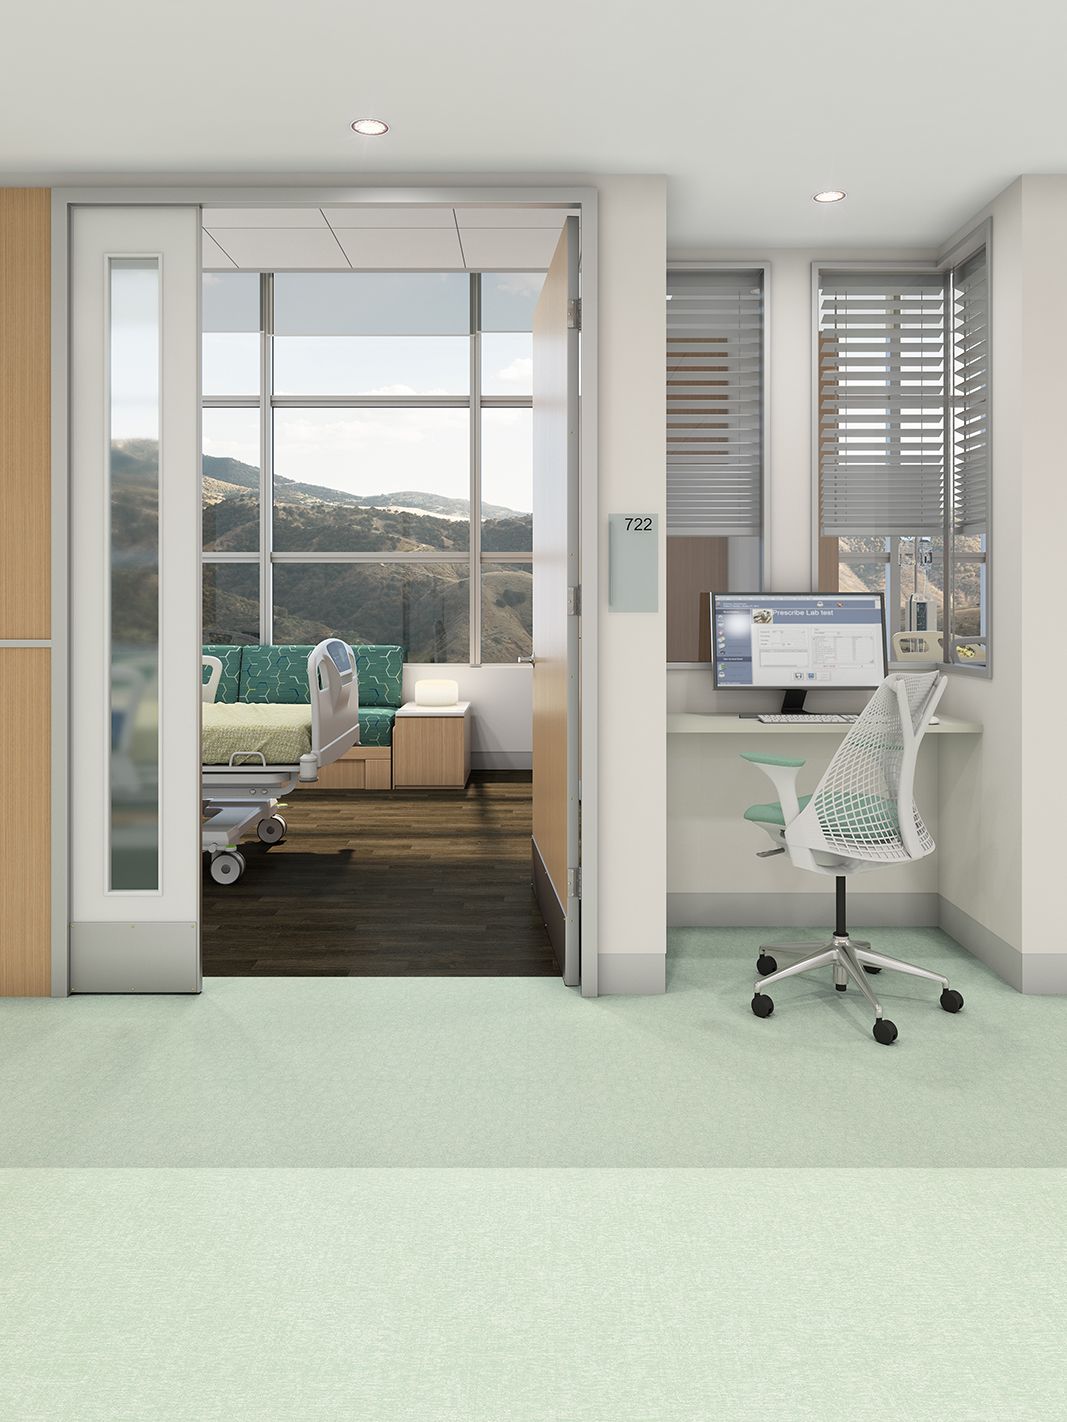 Interface's Spike-tacular, Bloom with a View and Continual Woodgrains vinyl sheet in hospital corridor and patient room imagen número 4